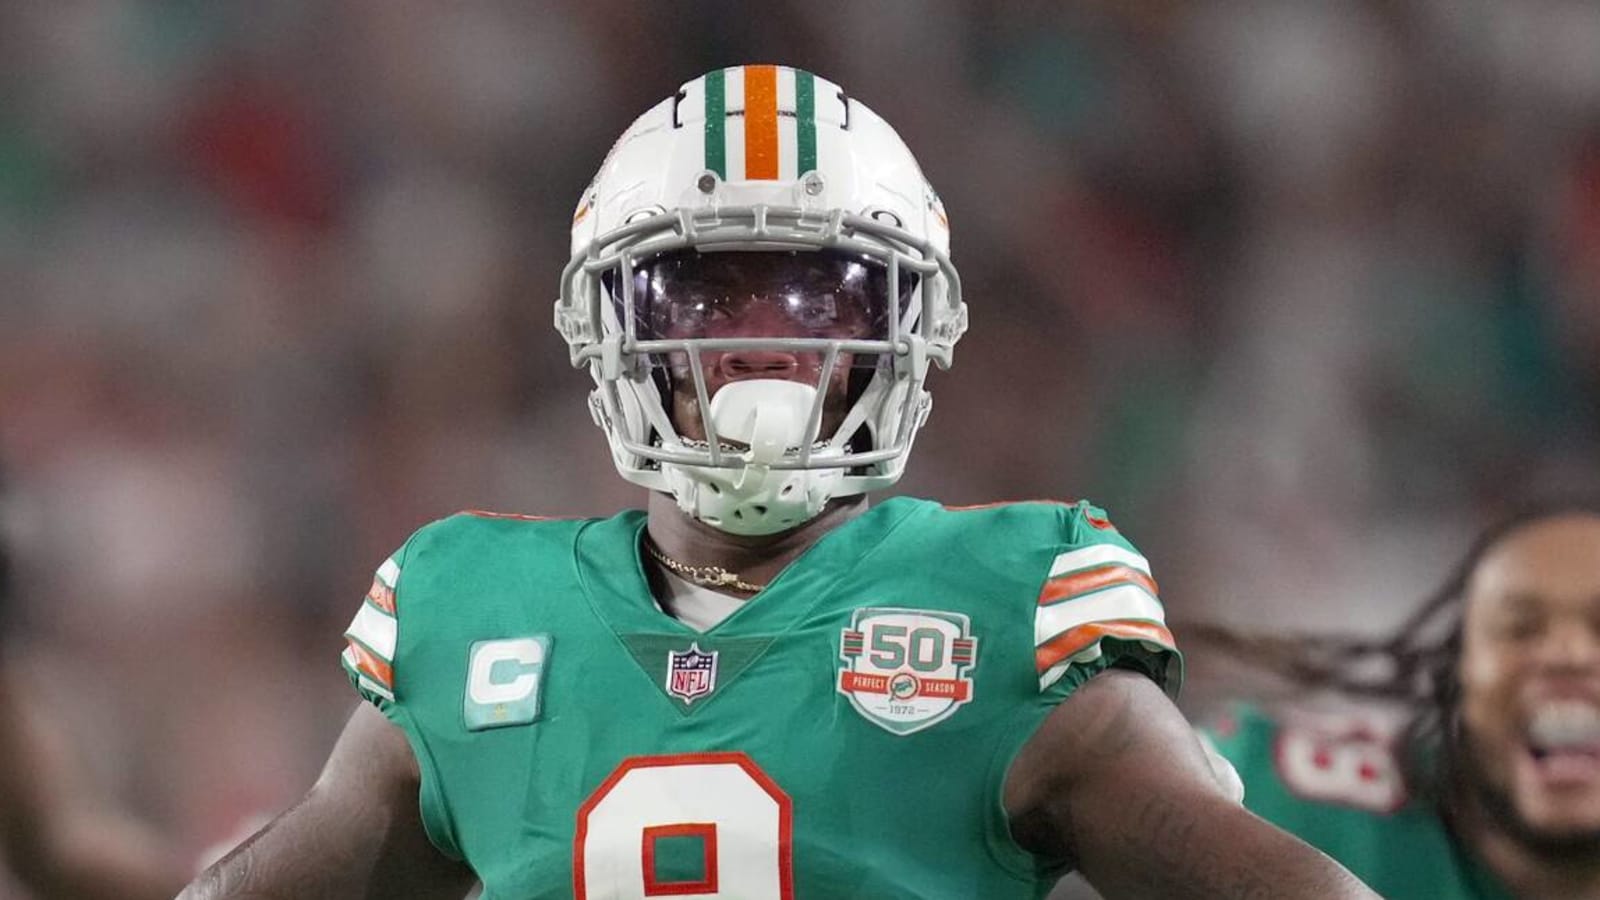 Dolphins safety appears to take a shot at former DC